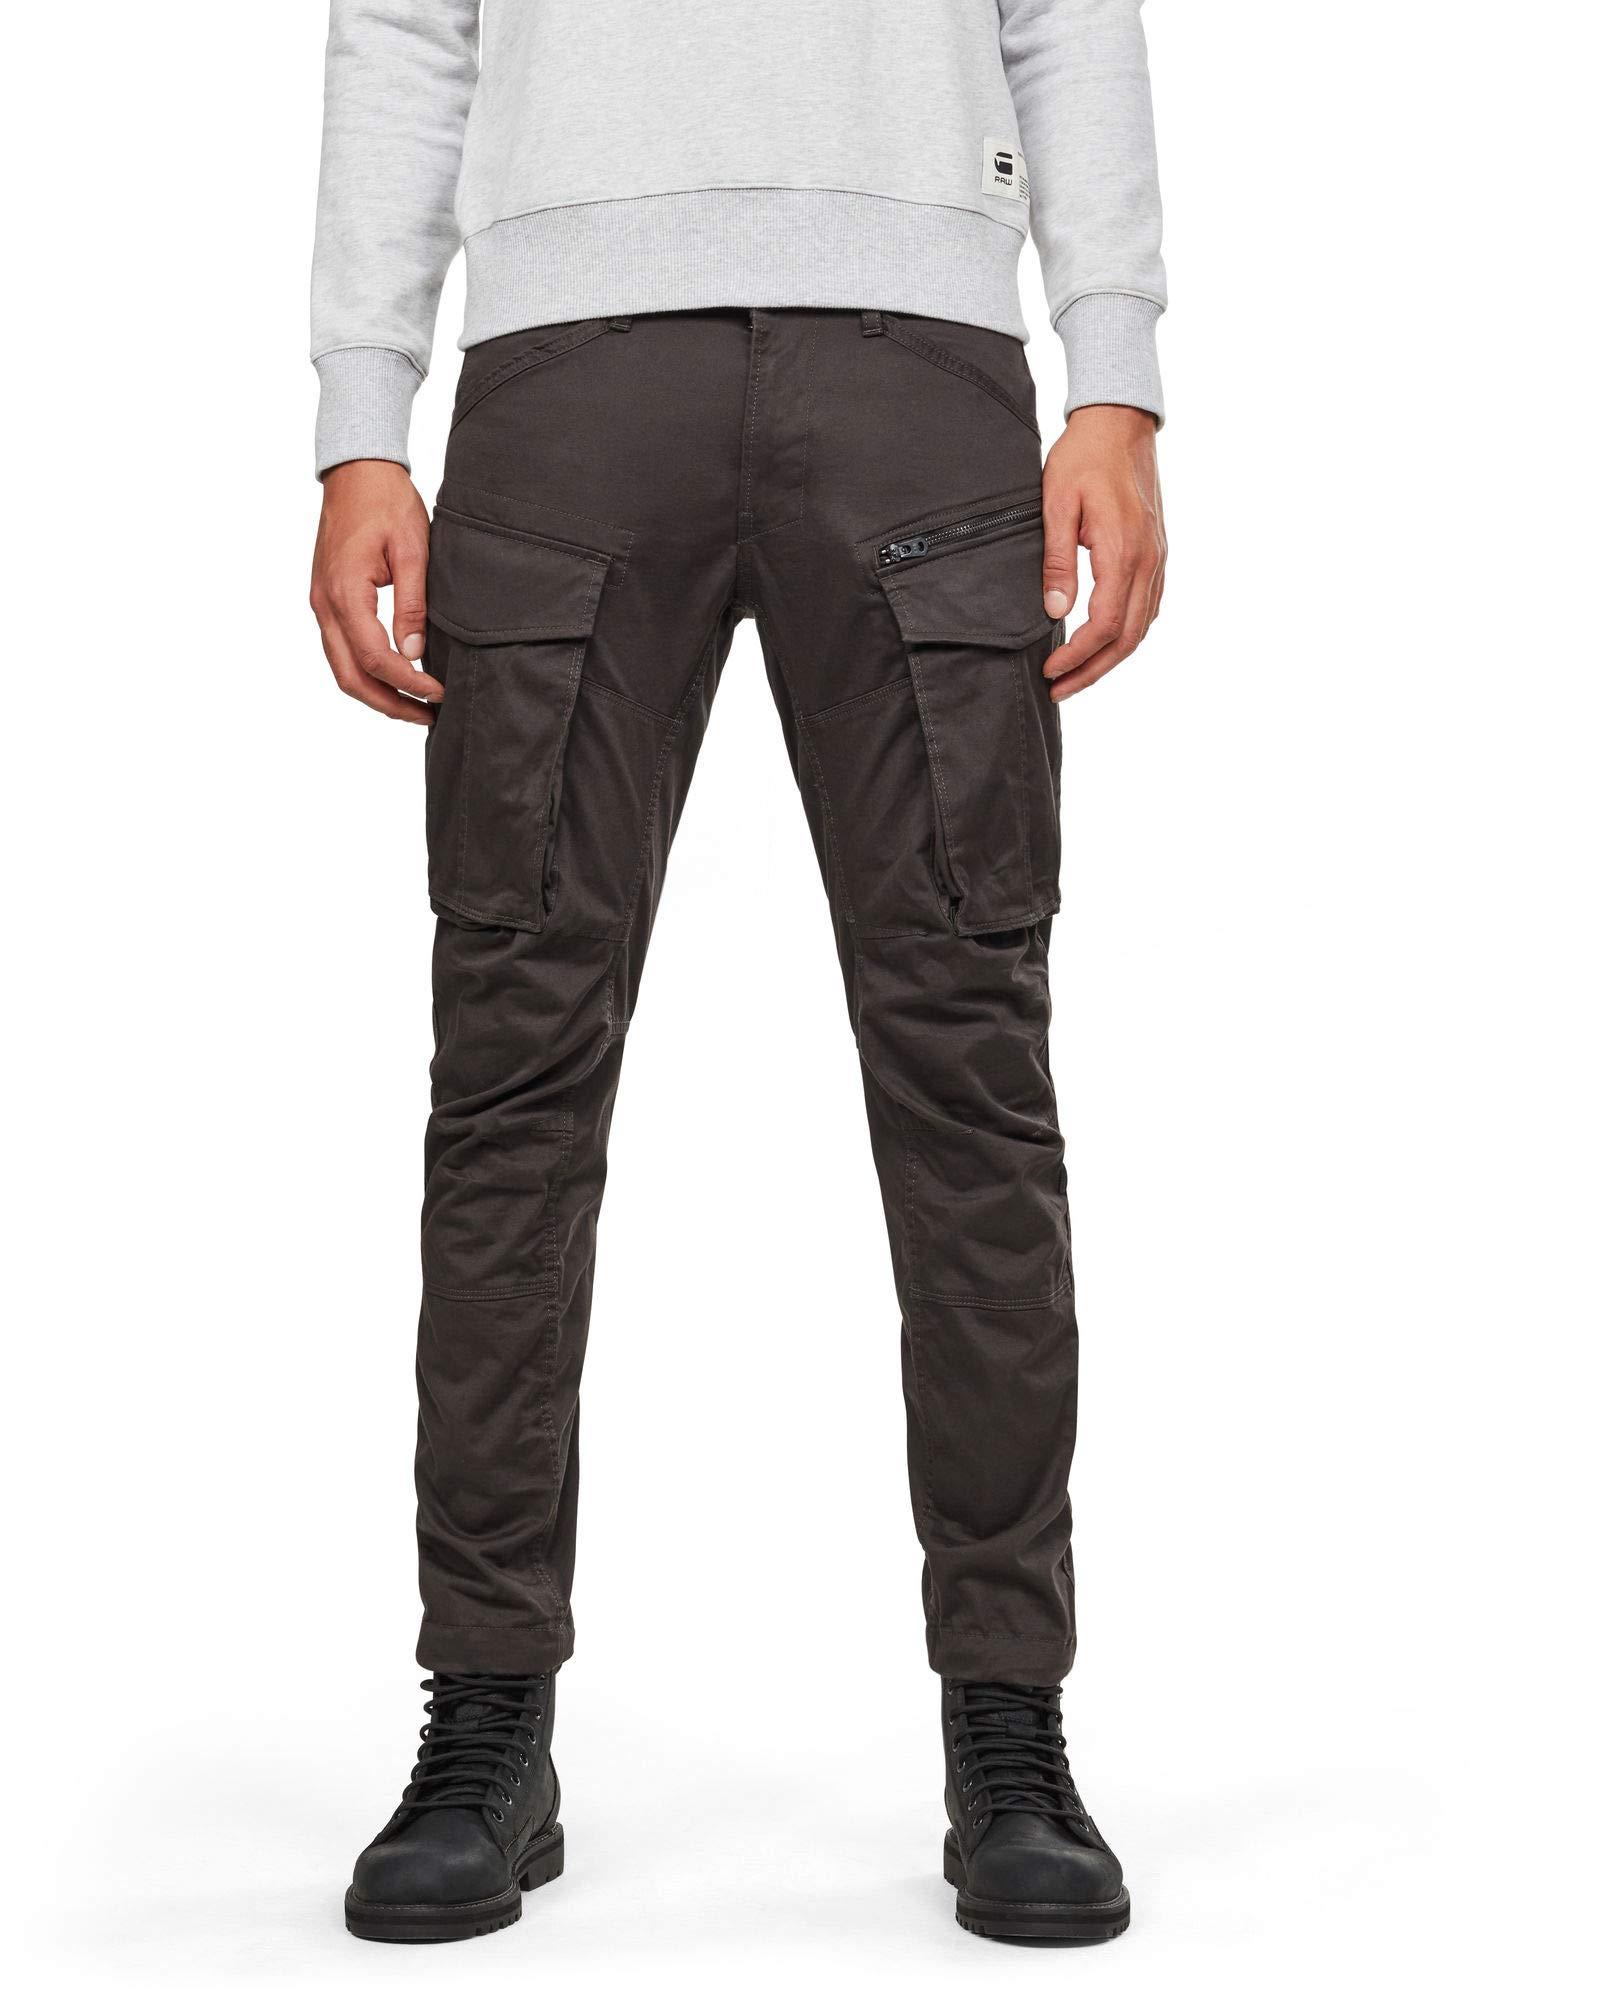 G-Star RAW Rovic Zip 3d Straight Tapered Fit Cargo Pants in Gray for Men